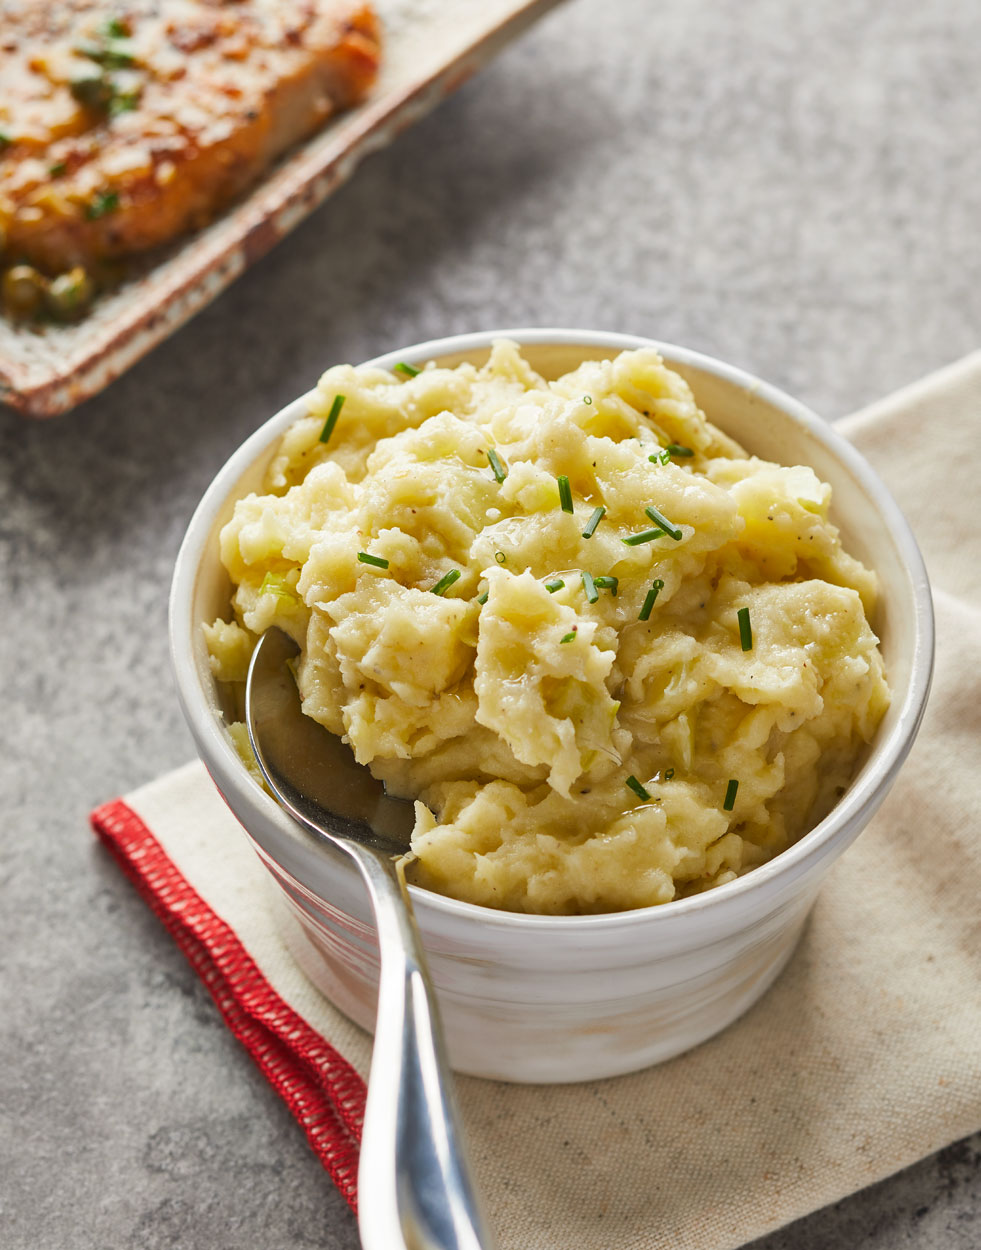 Mashed Golden Potatoes with leeks